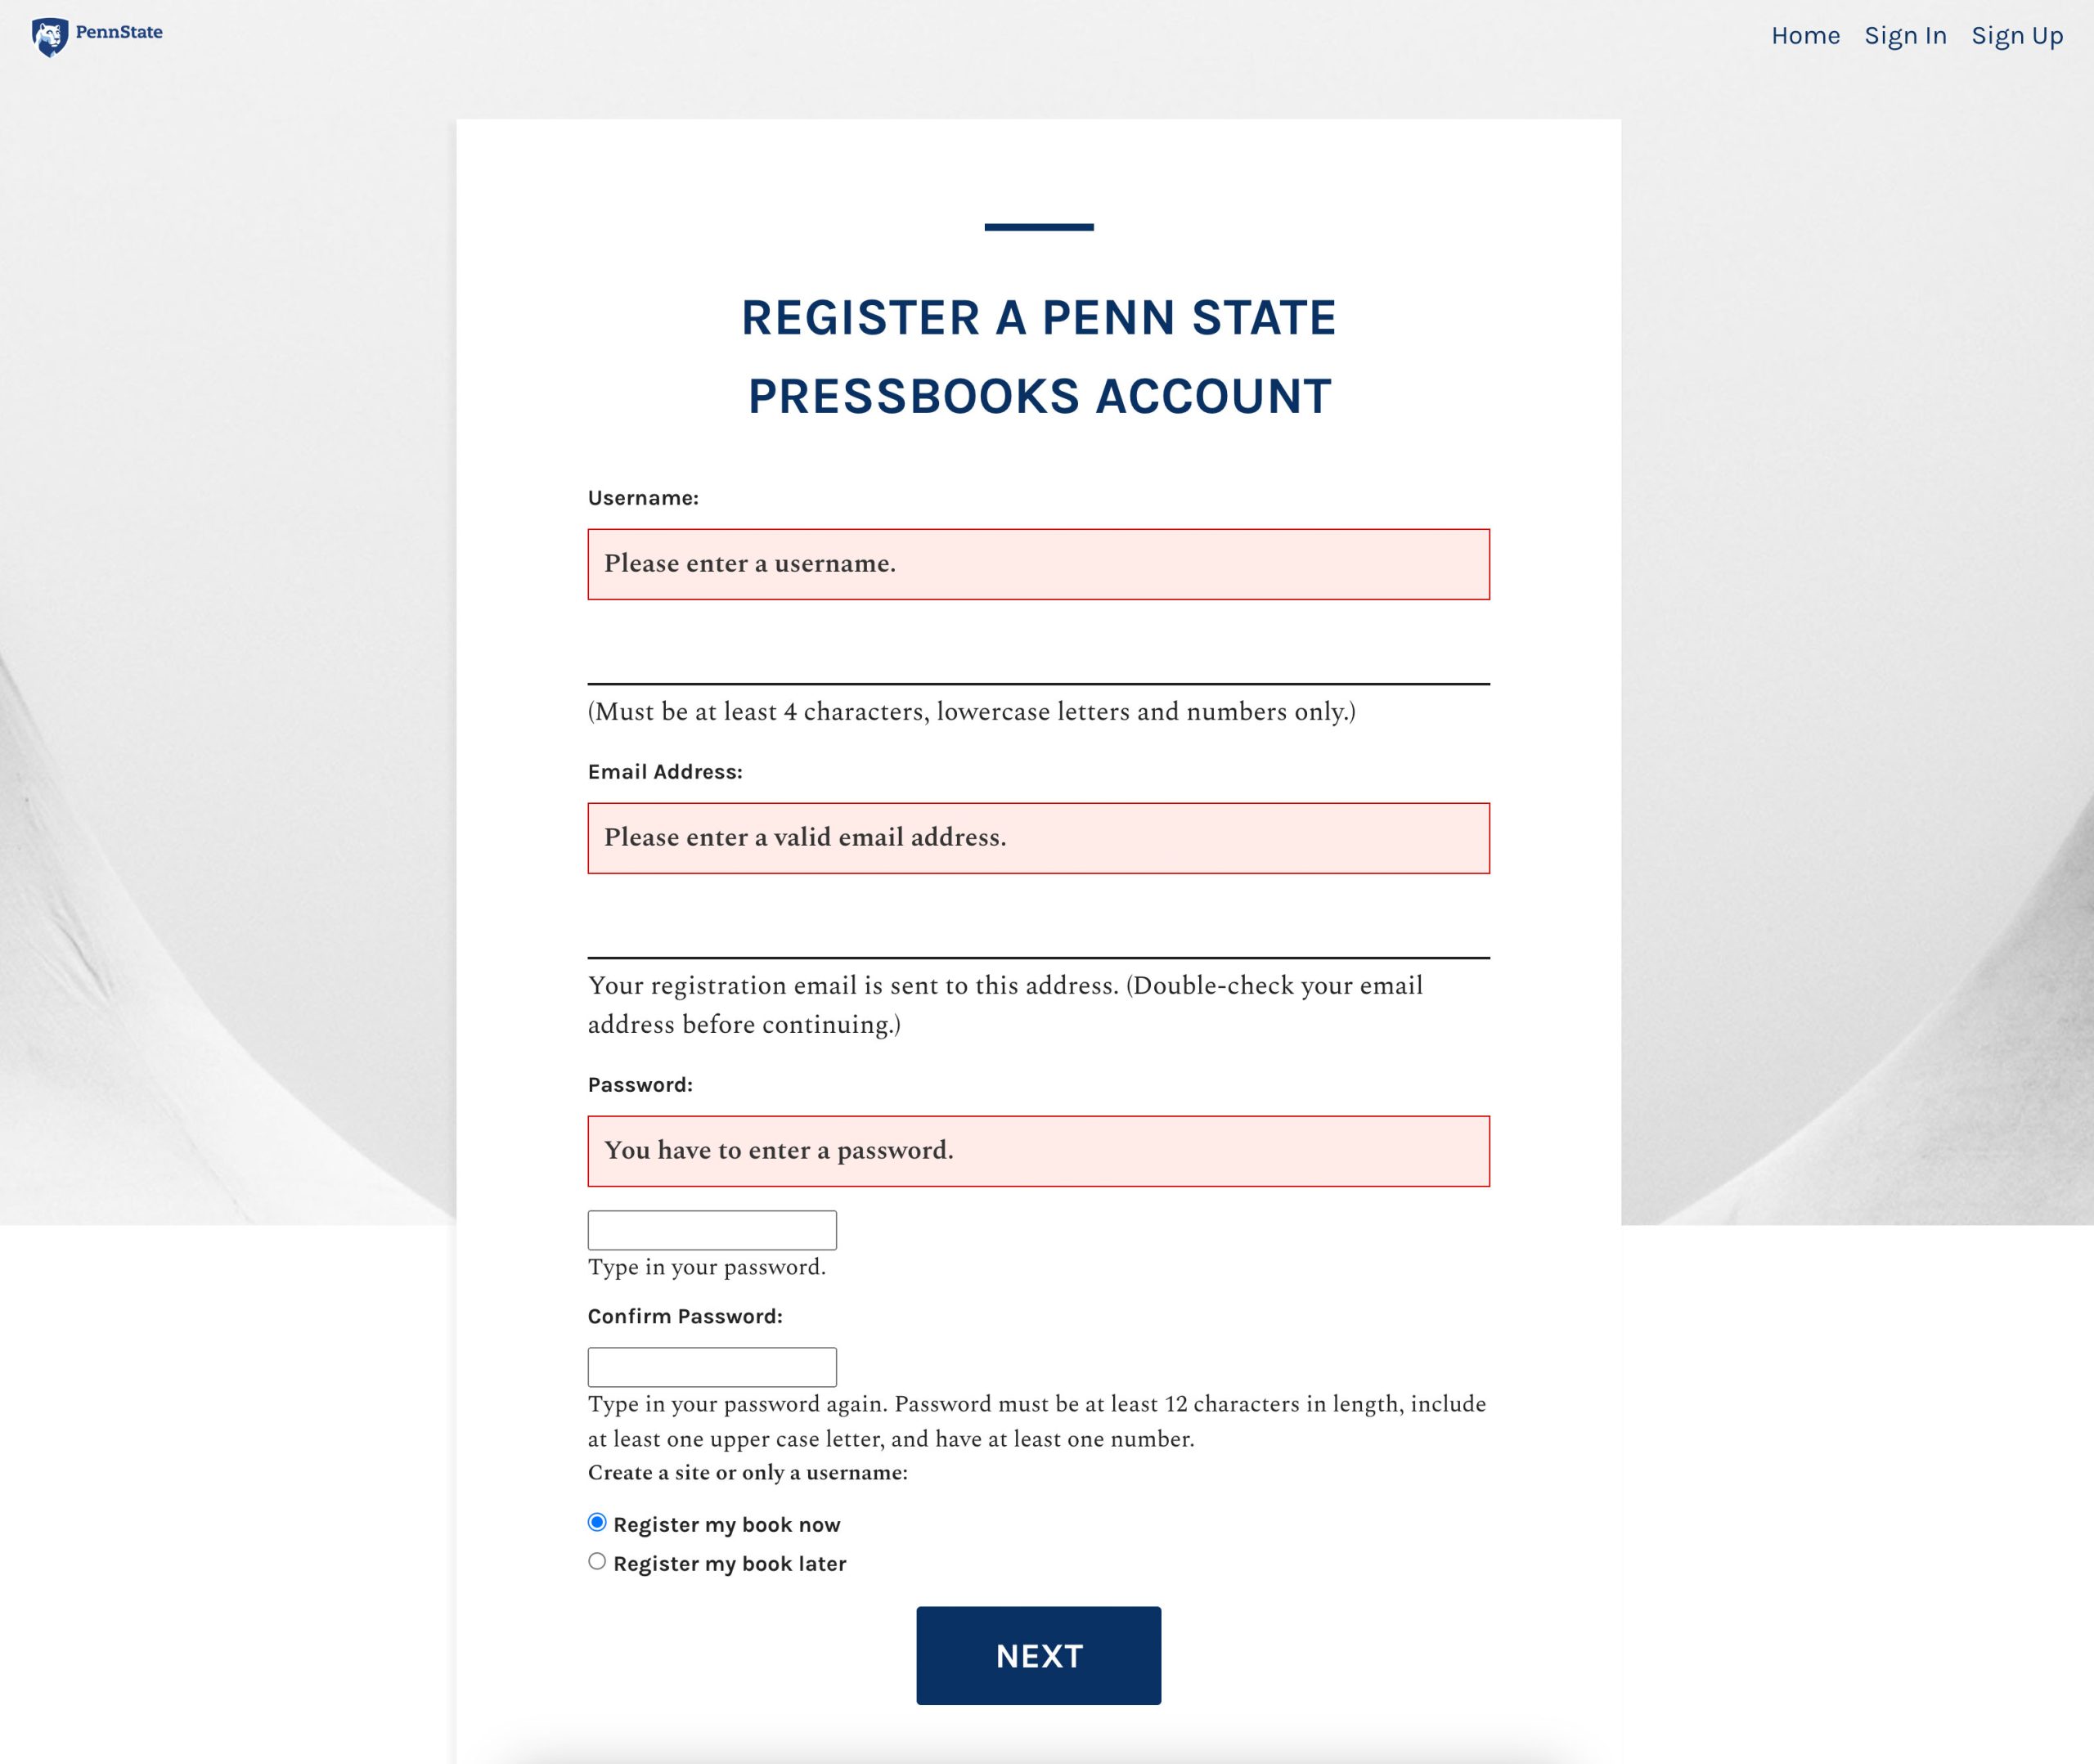 Registration page shows fields for name, email address, password and password verification.